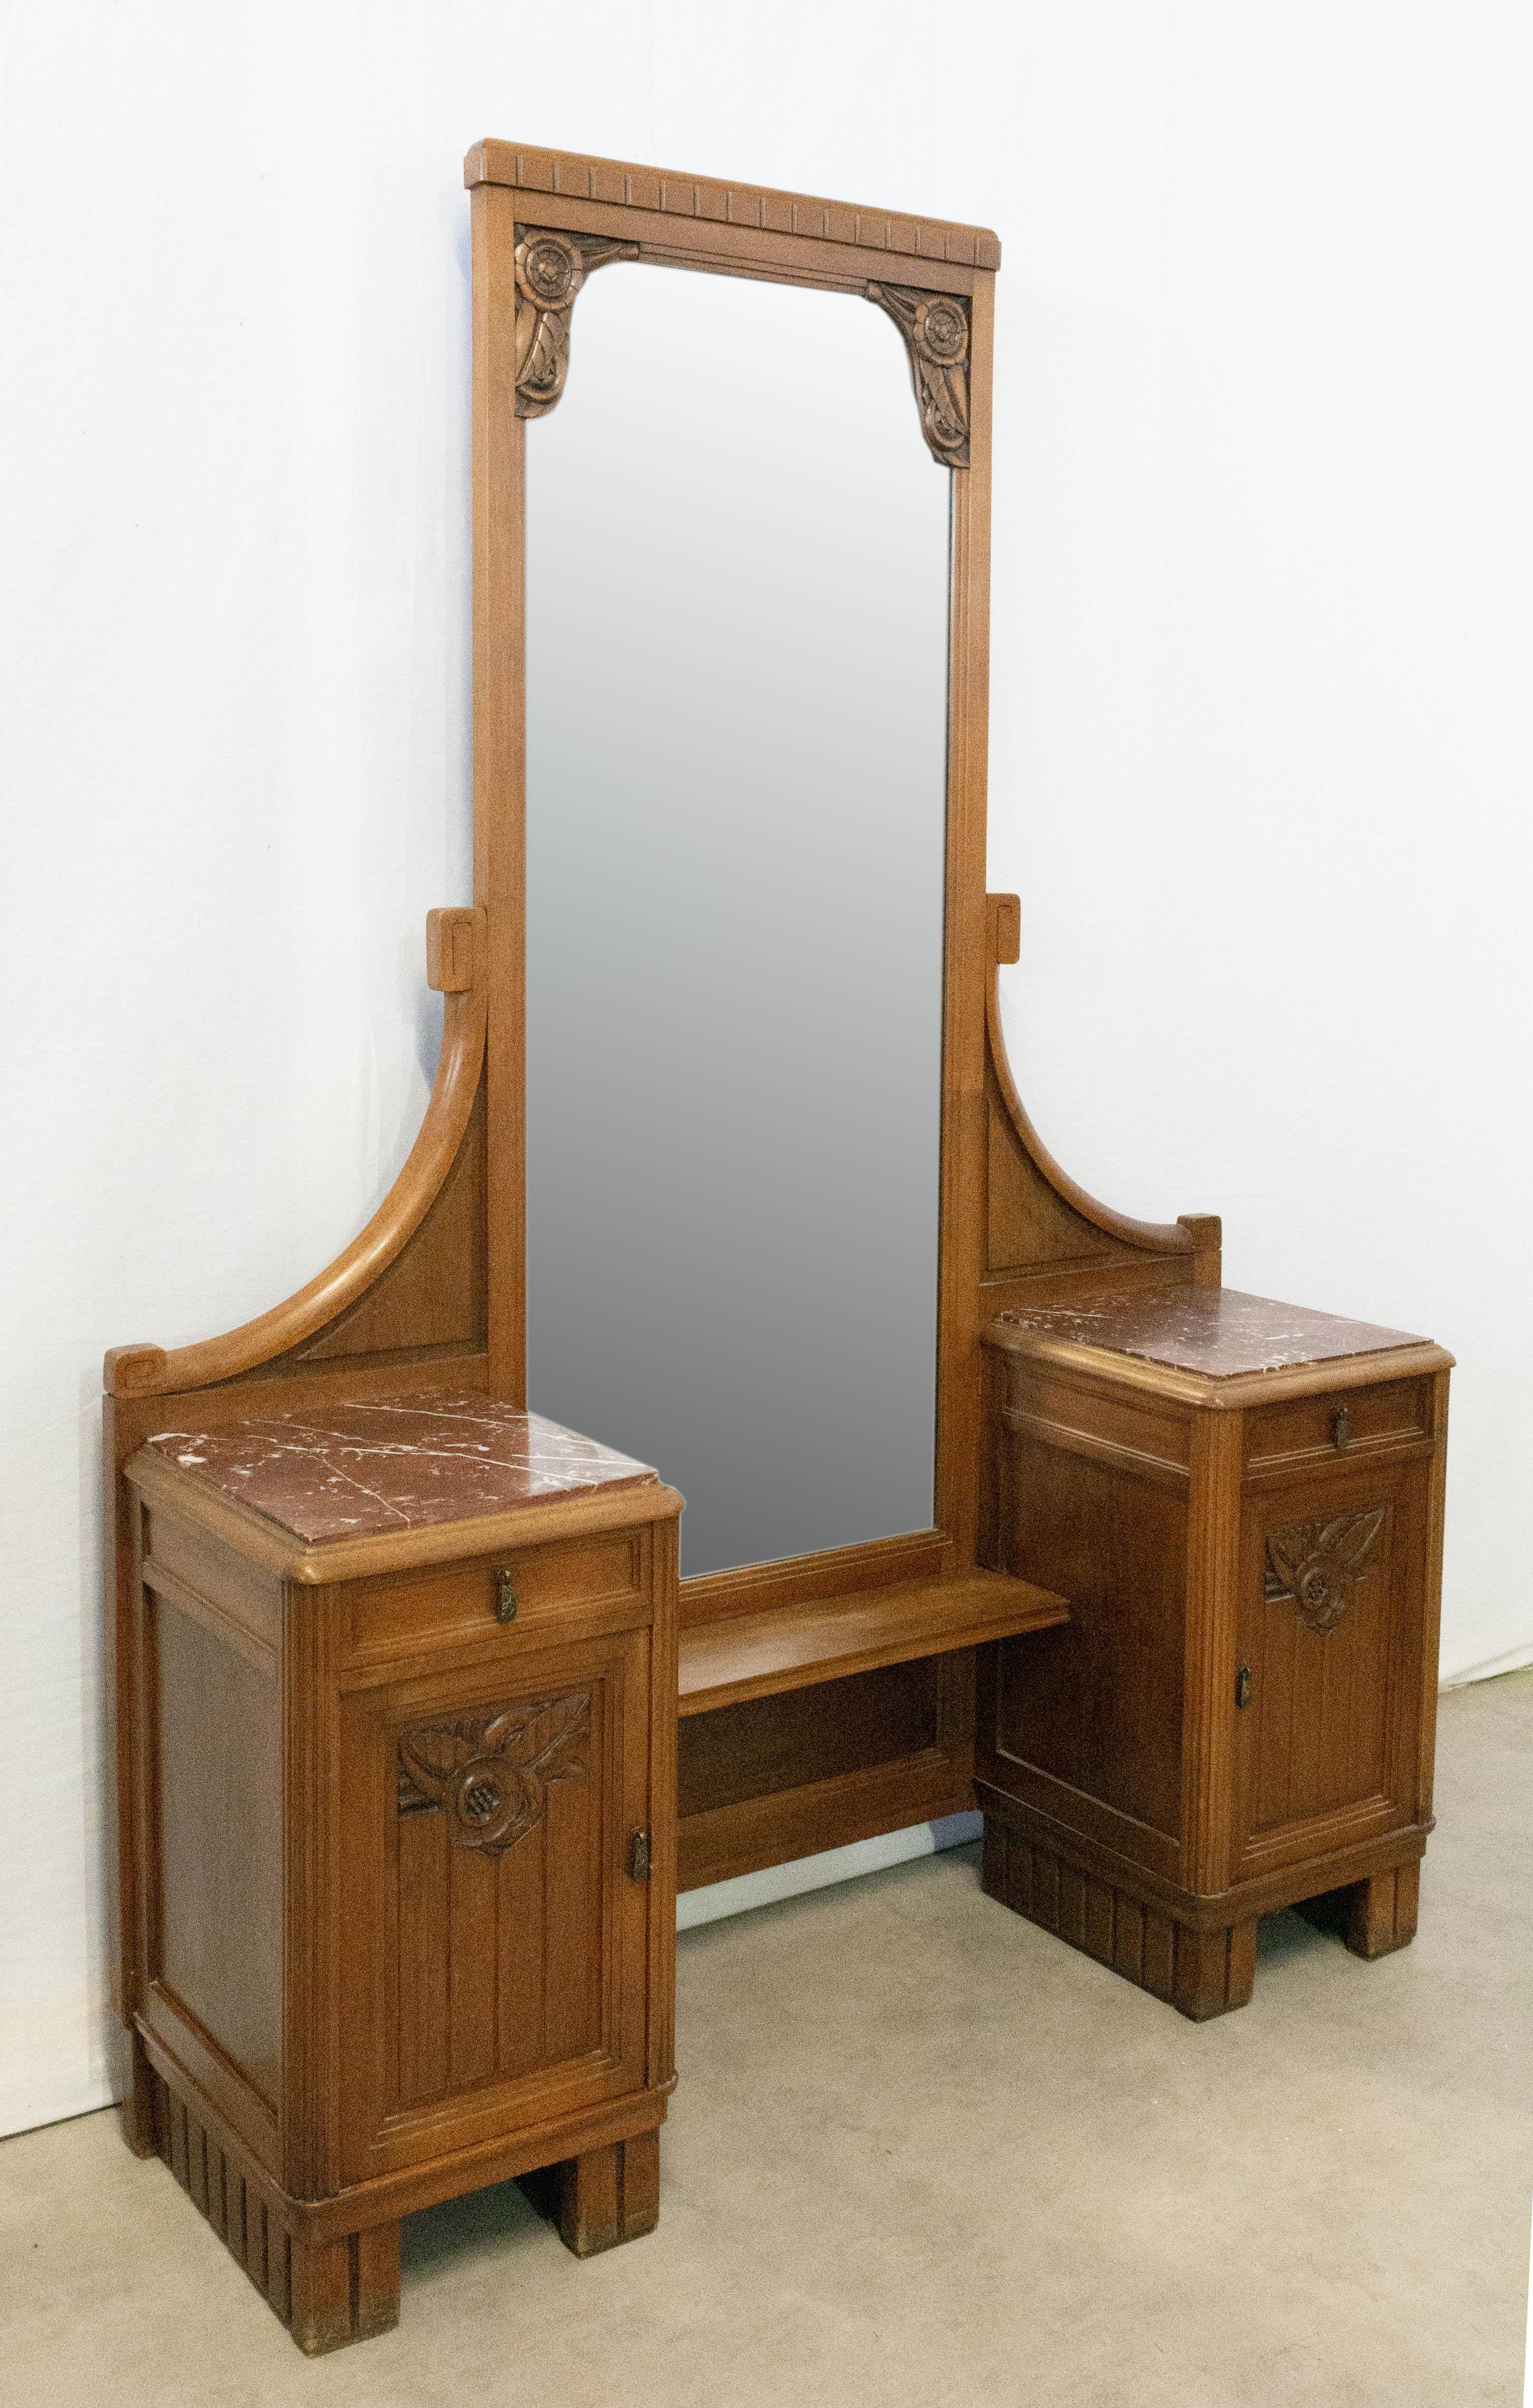 Dressing table with central psyche mirror Art Deco, circa 1930.
Side tables either side with a drawer and a cupboard eachone.
Beveled mirror with a small shelve shelf at its base.
Very good vintage condition.